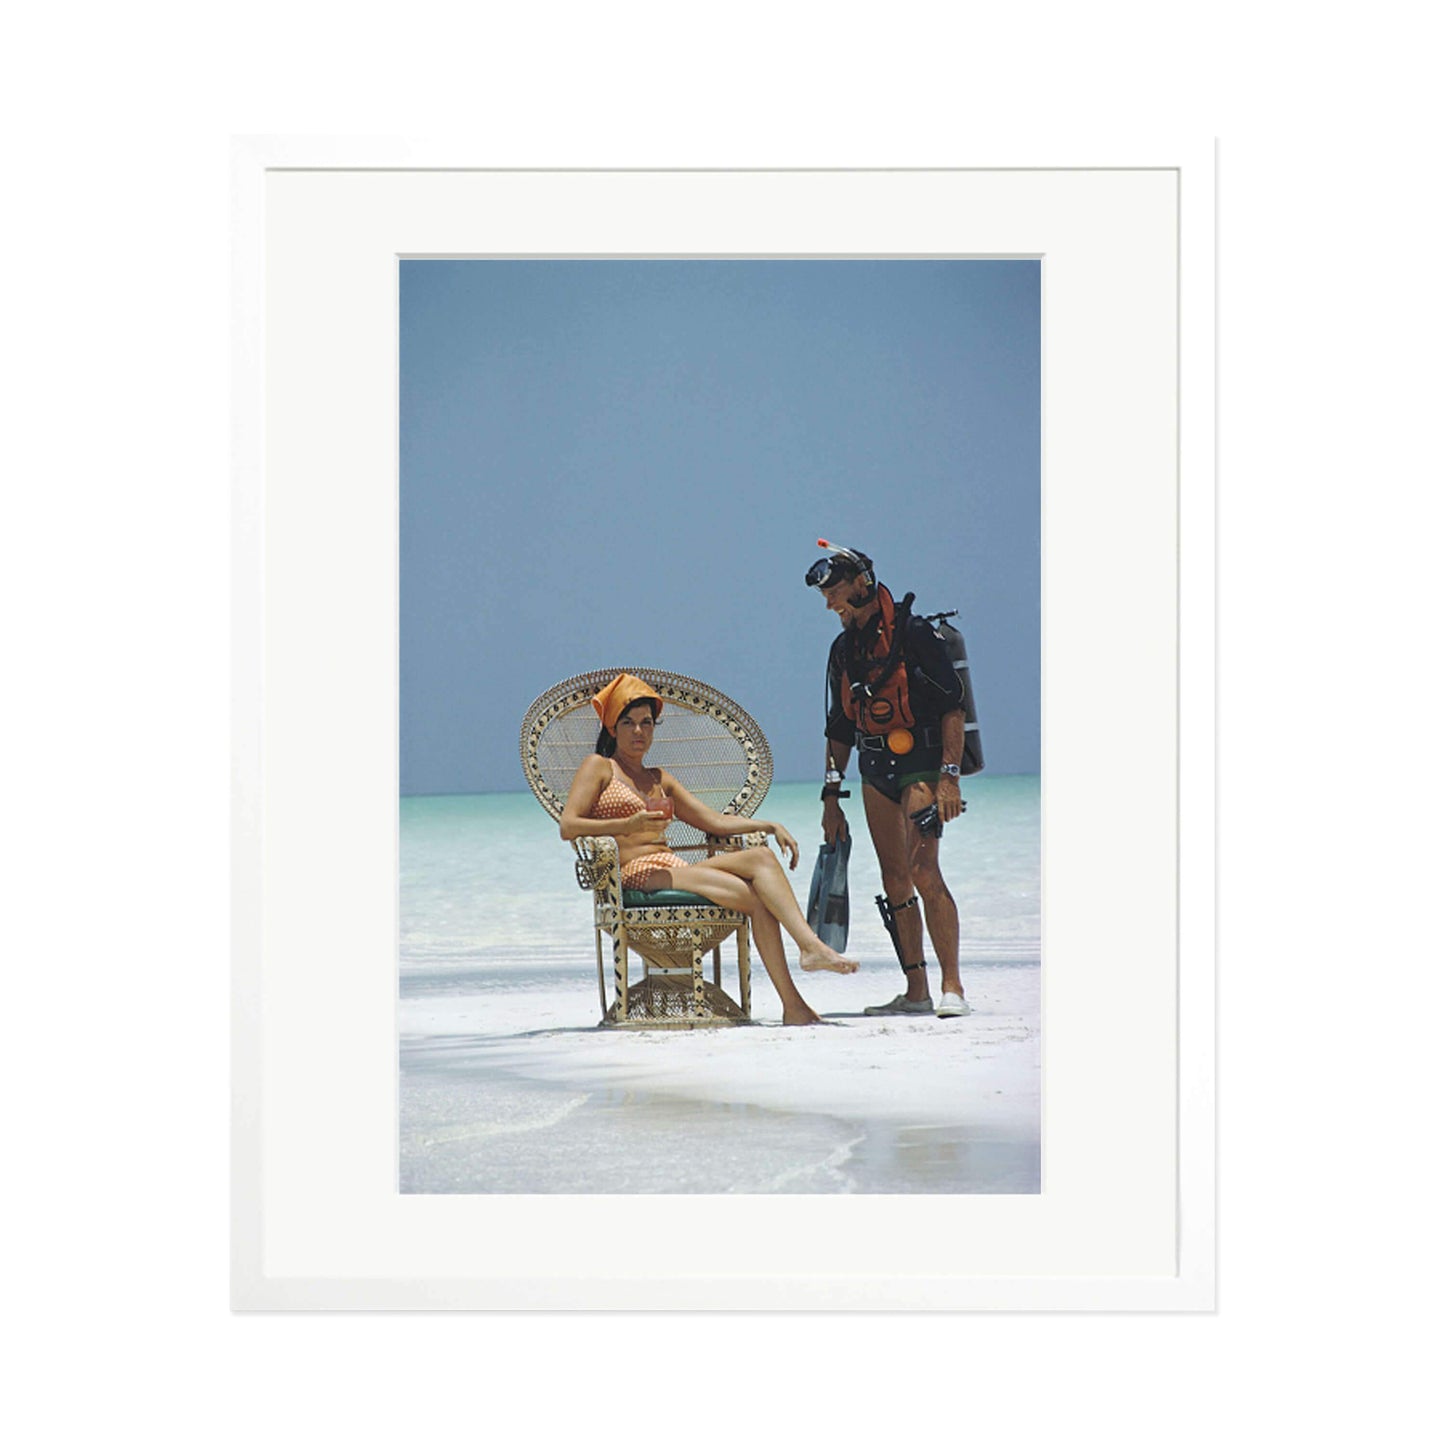 Slim Aarons "A Friendly Chat" Framed Print